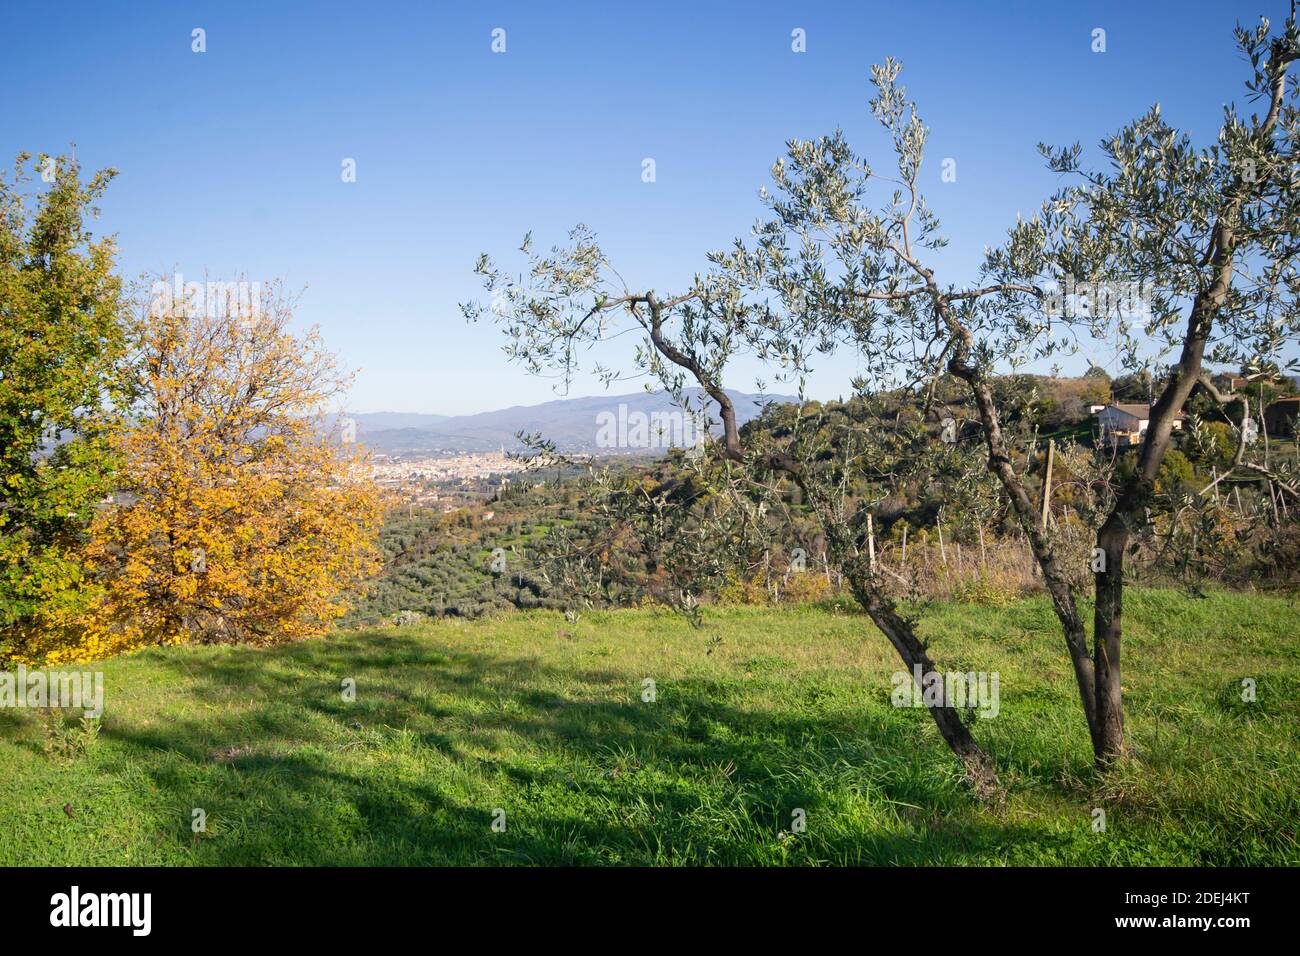 young olive tree on mountain field in TUscany land with Arezzo city on the background Stock Photo